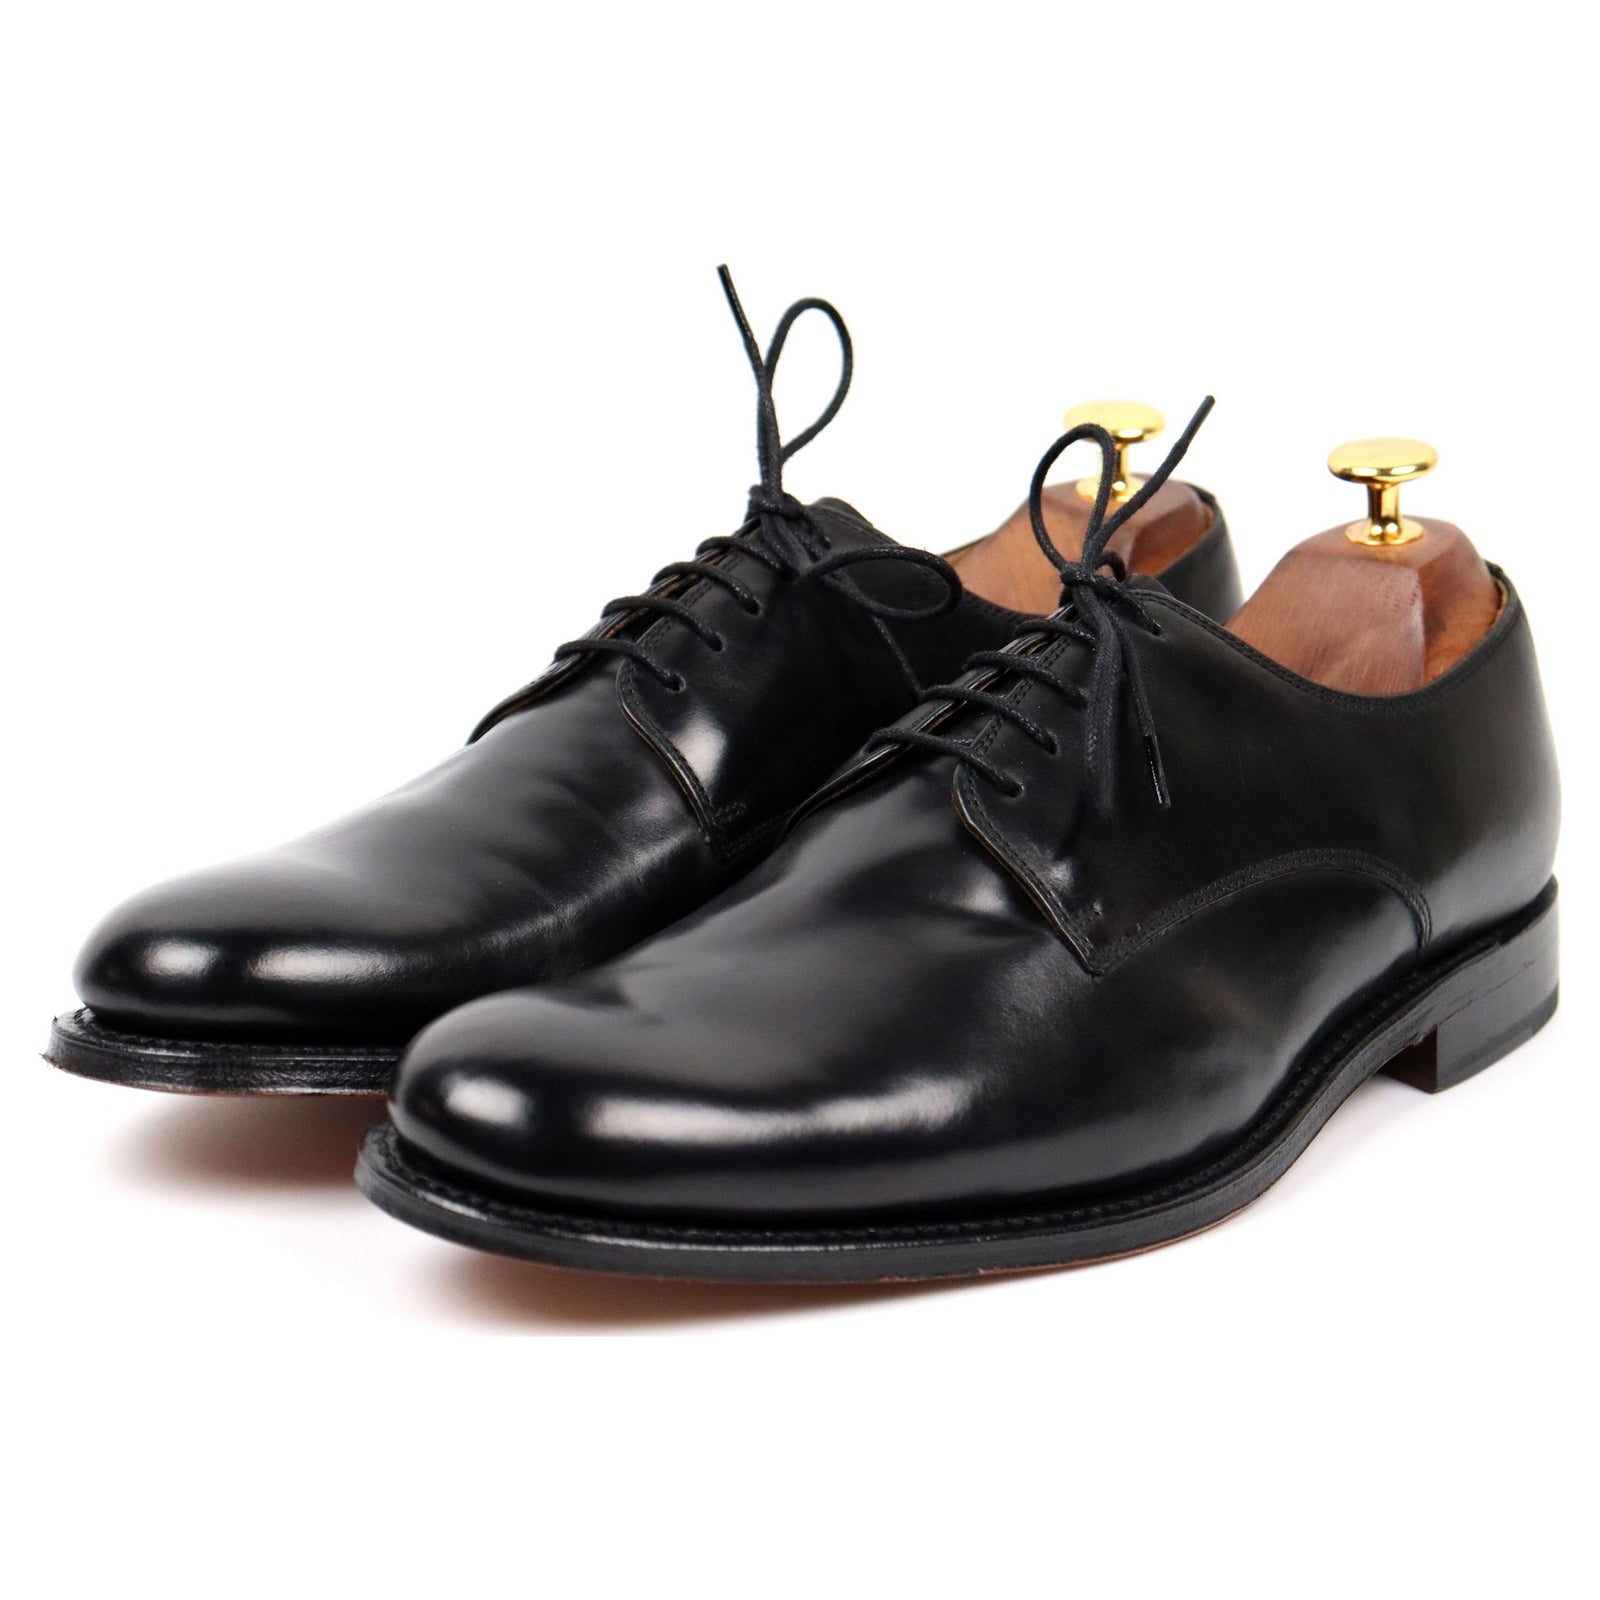 Grenson | Abbot's Shoes